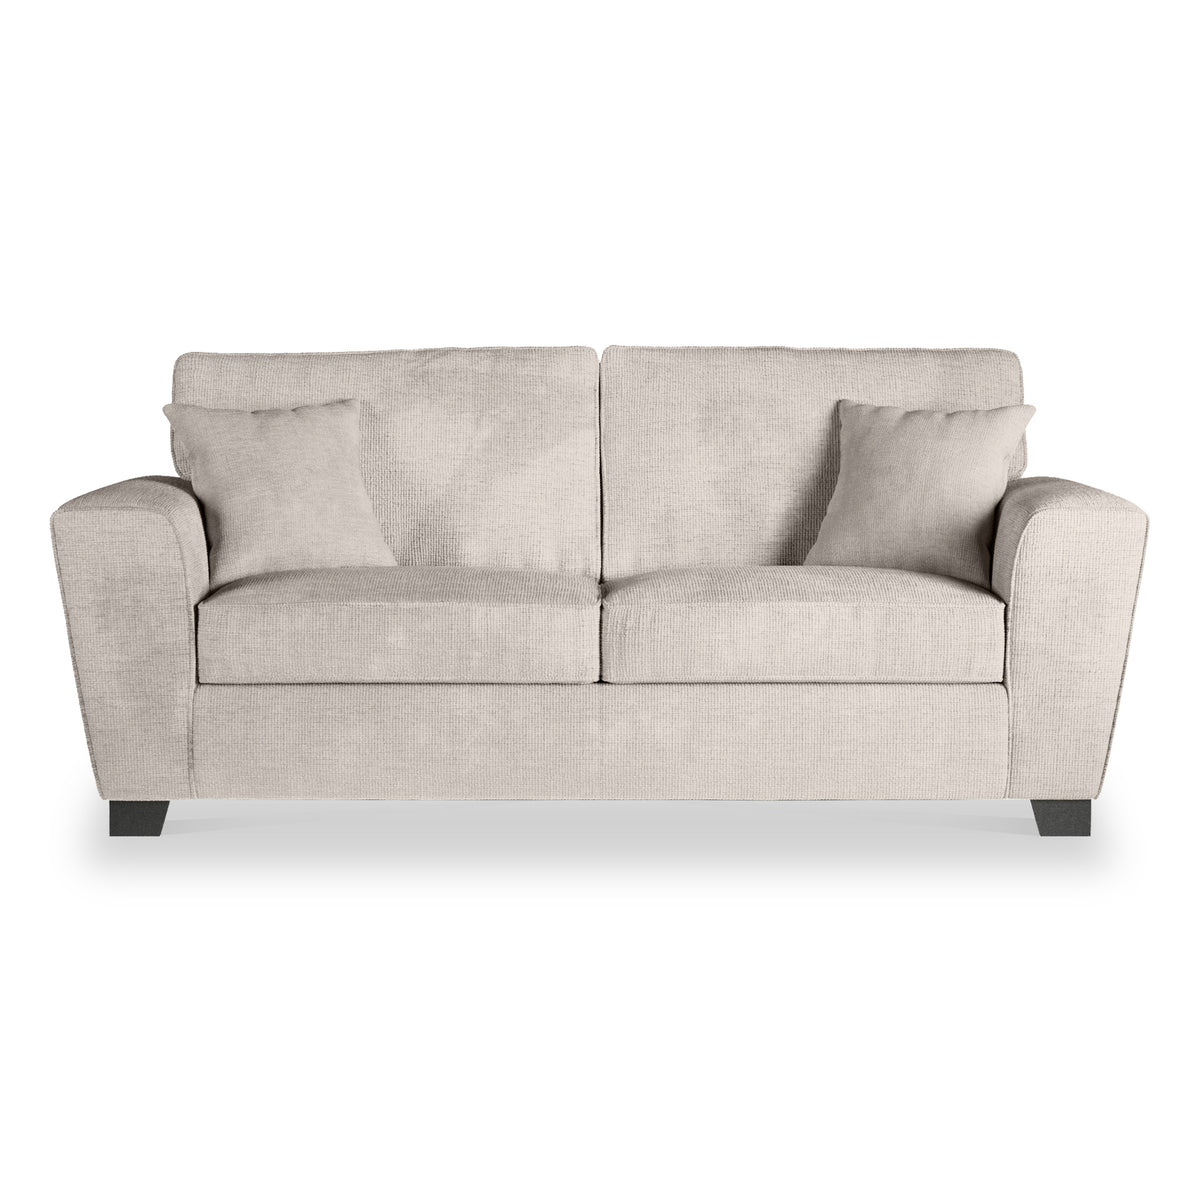 Chester Stone Hopsack 3 Seater couch